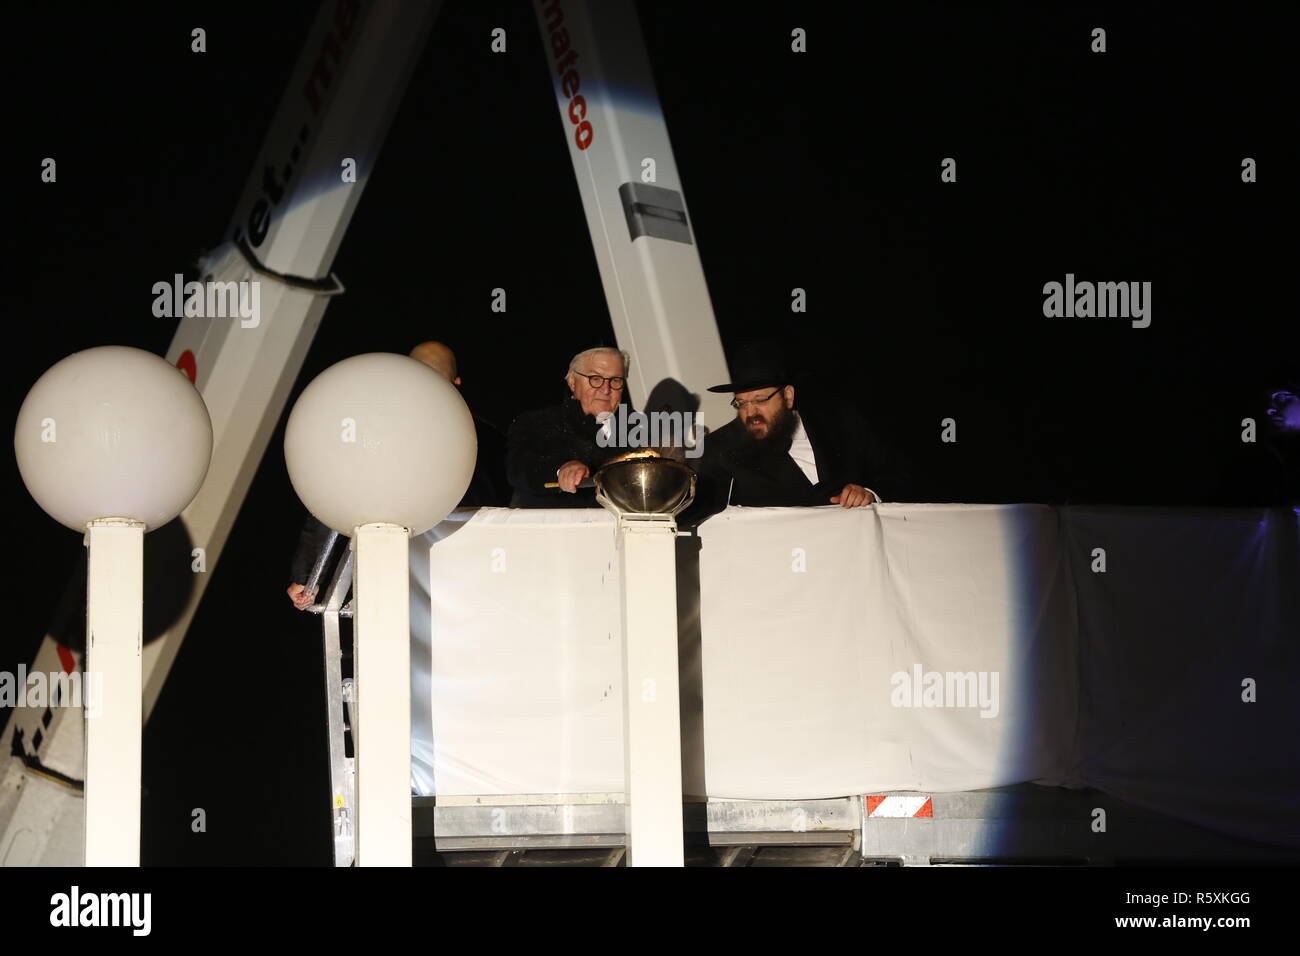 Berlin, Germany. 02nd Dec, 2018. Federal President Frank-Walter Steinmeier and Rabbi Teichtal lighting the ten-meter-high Hanukkah lamp in front of the Brandenburger Tor. On Sunday evening, December 2, 2018, Hanukkah will begin this year. The Jewish Education Center Chabad Berlin begins this eight-day Jewish festival of lights at the Brandenburger Tor. Credit: SAO Struck/Alamy Live News Stock Photo